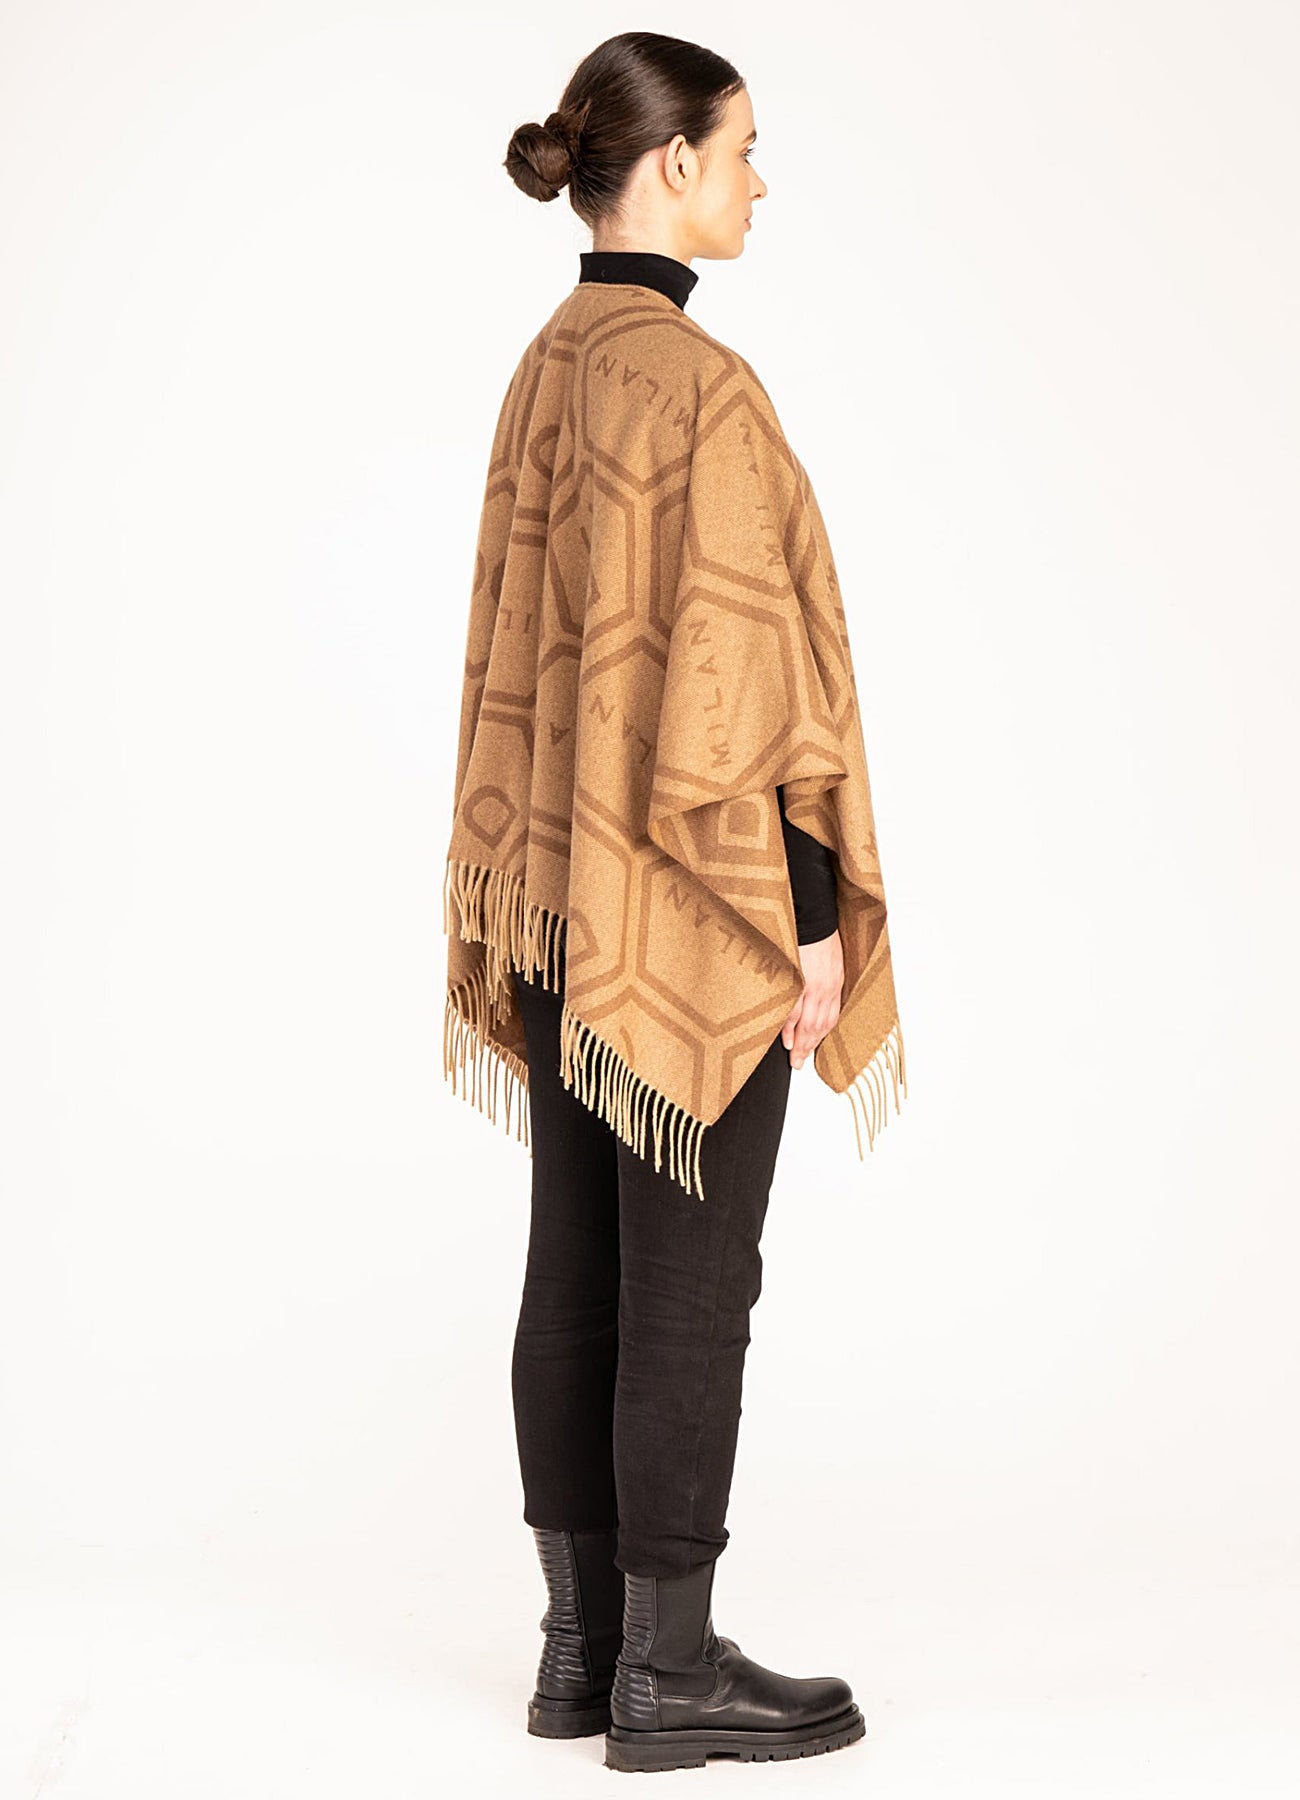 Cape Exclusive Iconic Design DC poncho  100% Pure wool